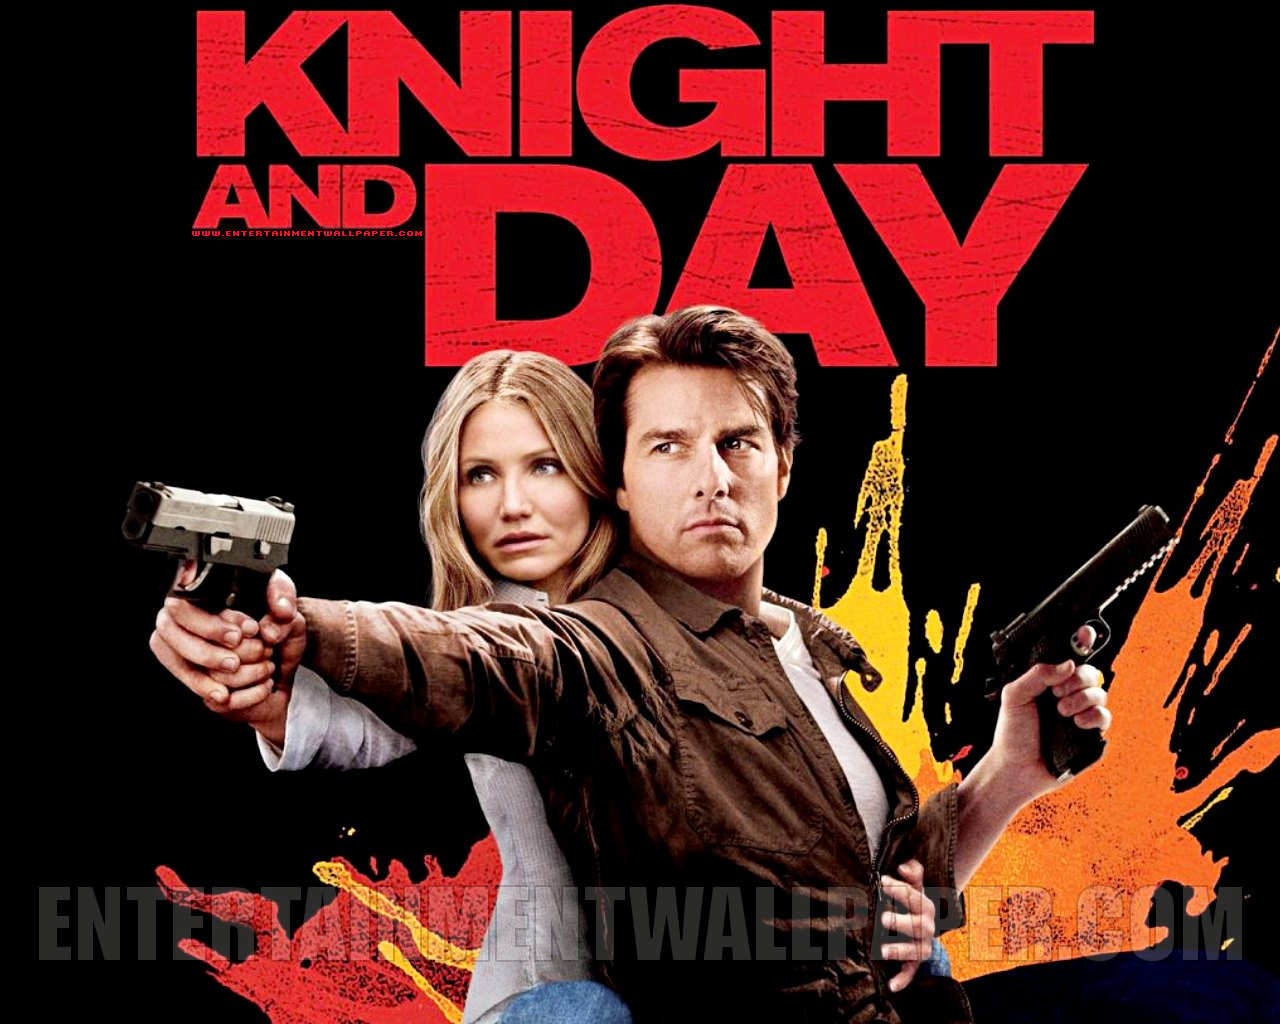 Nice Images Collection: Knight And Day Desktop Wallpapers